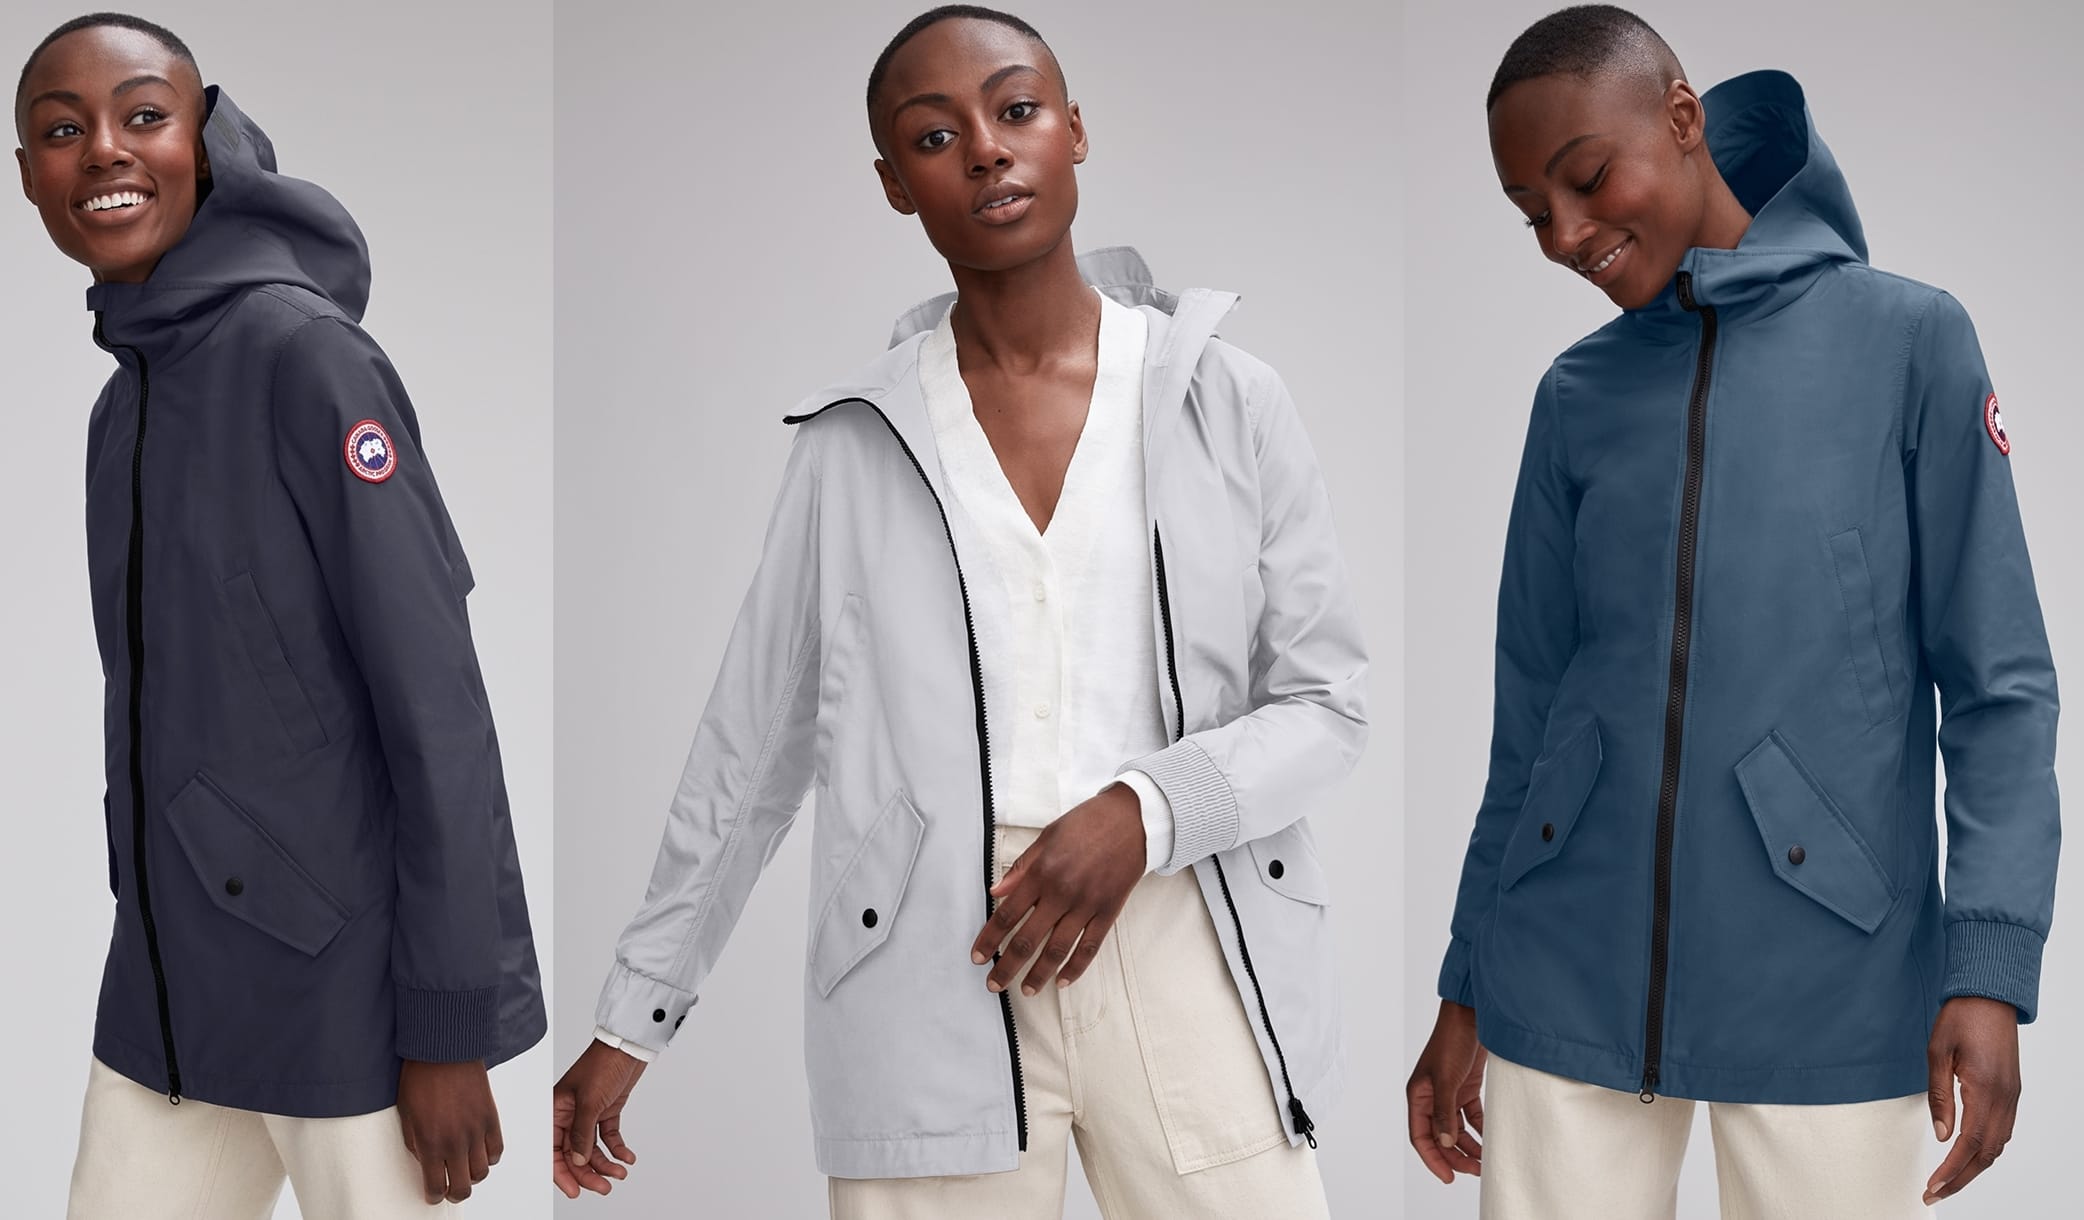 Stay comfortable through spring storms in this jacket designed with water-resistant and windproof fabric